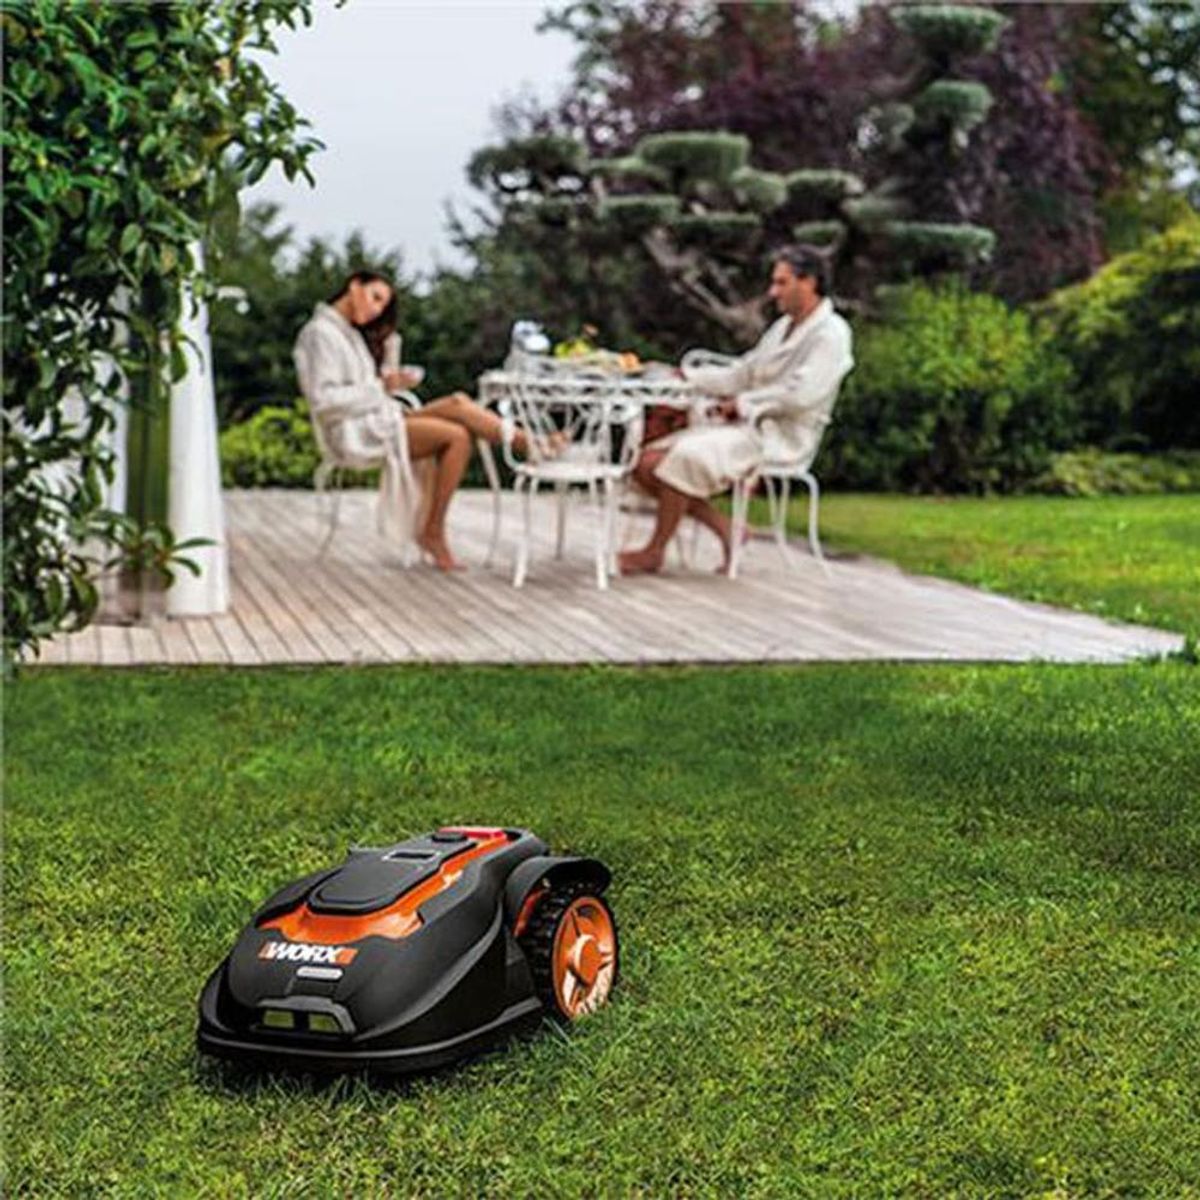 This Robot Is like Roomba for Your Lawn